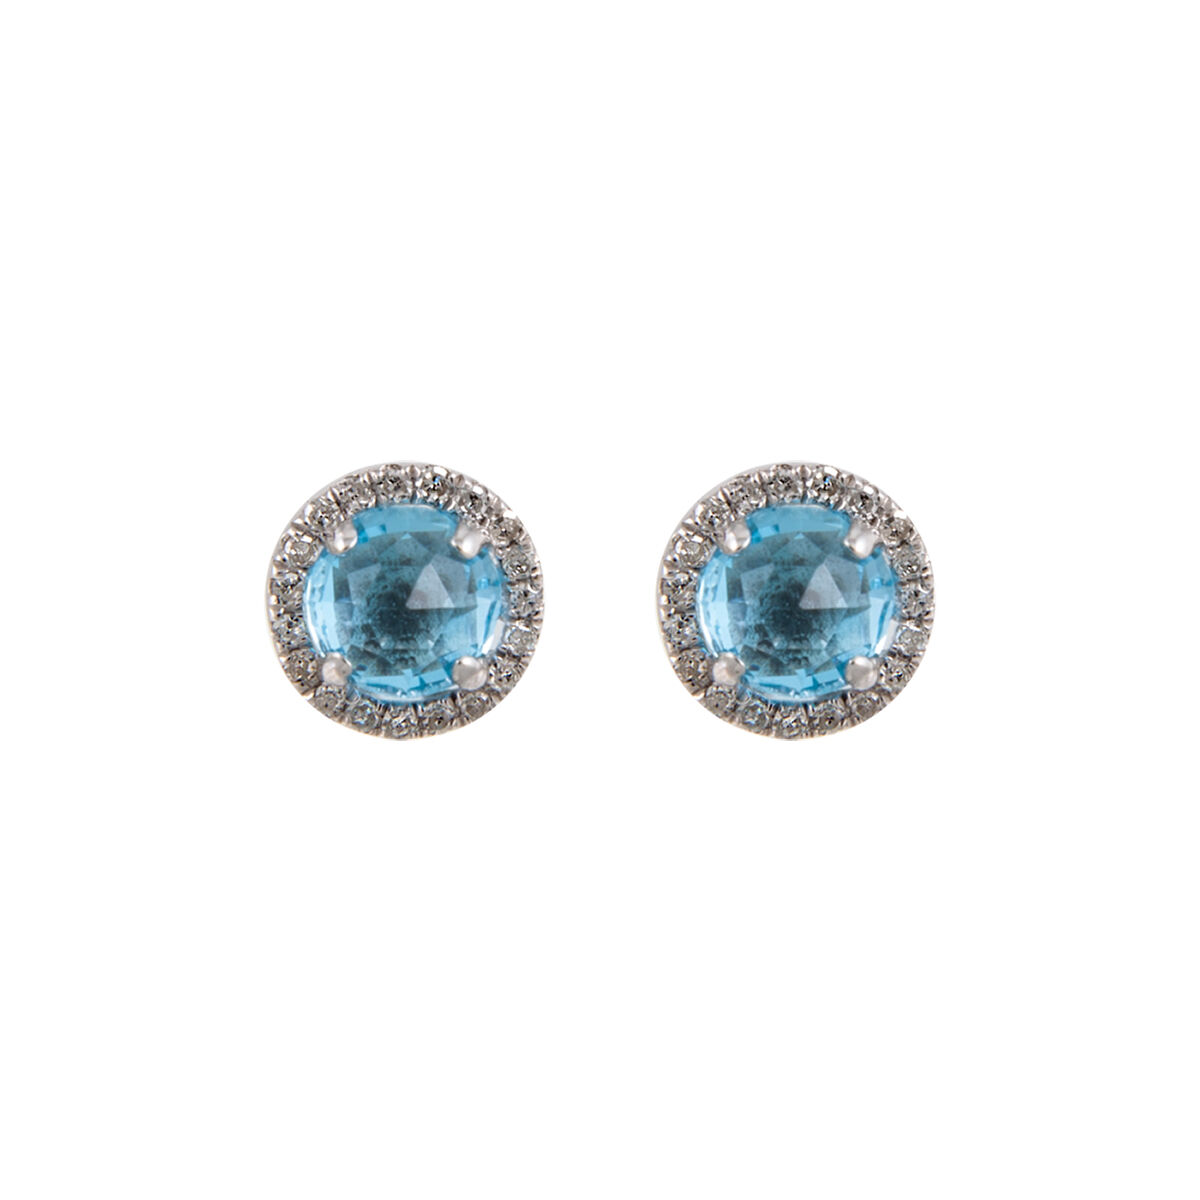 Silver border earrings with blue topaz , J01485-01-BT, hi-res